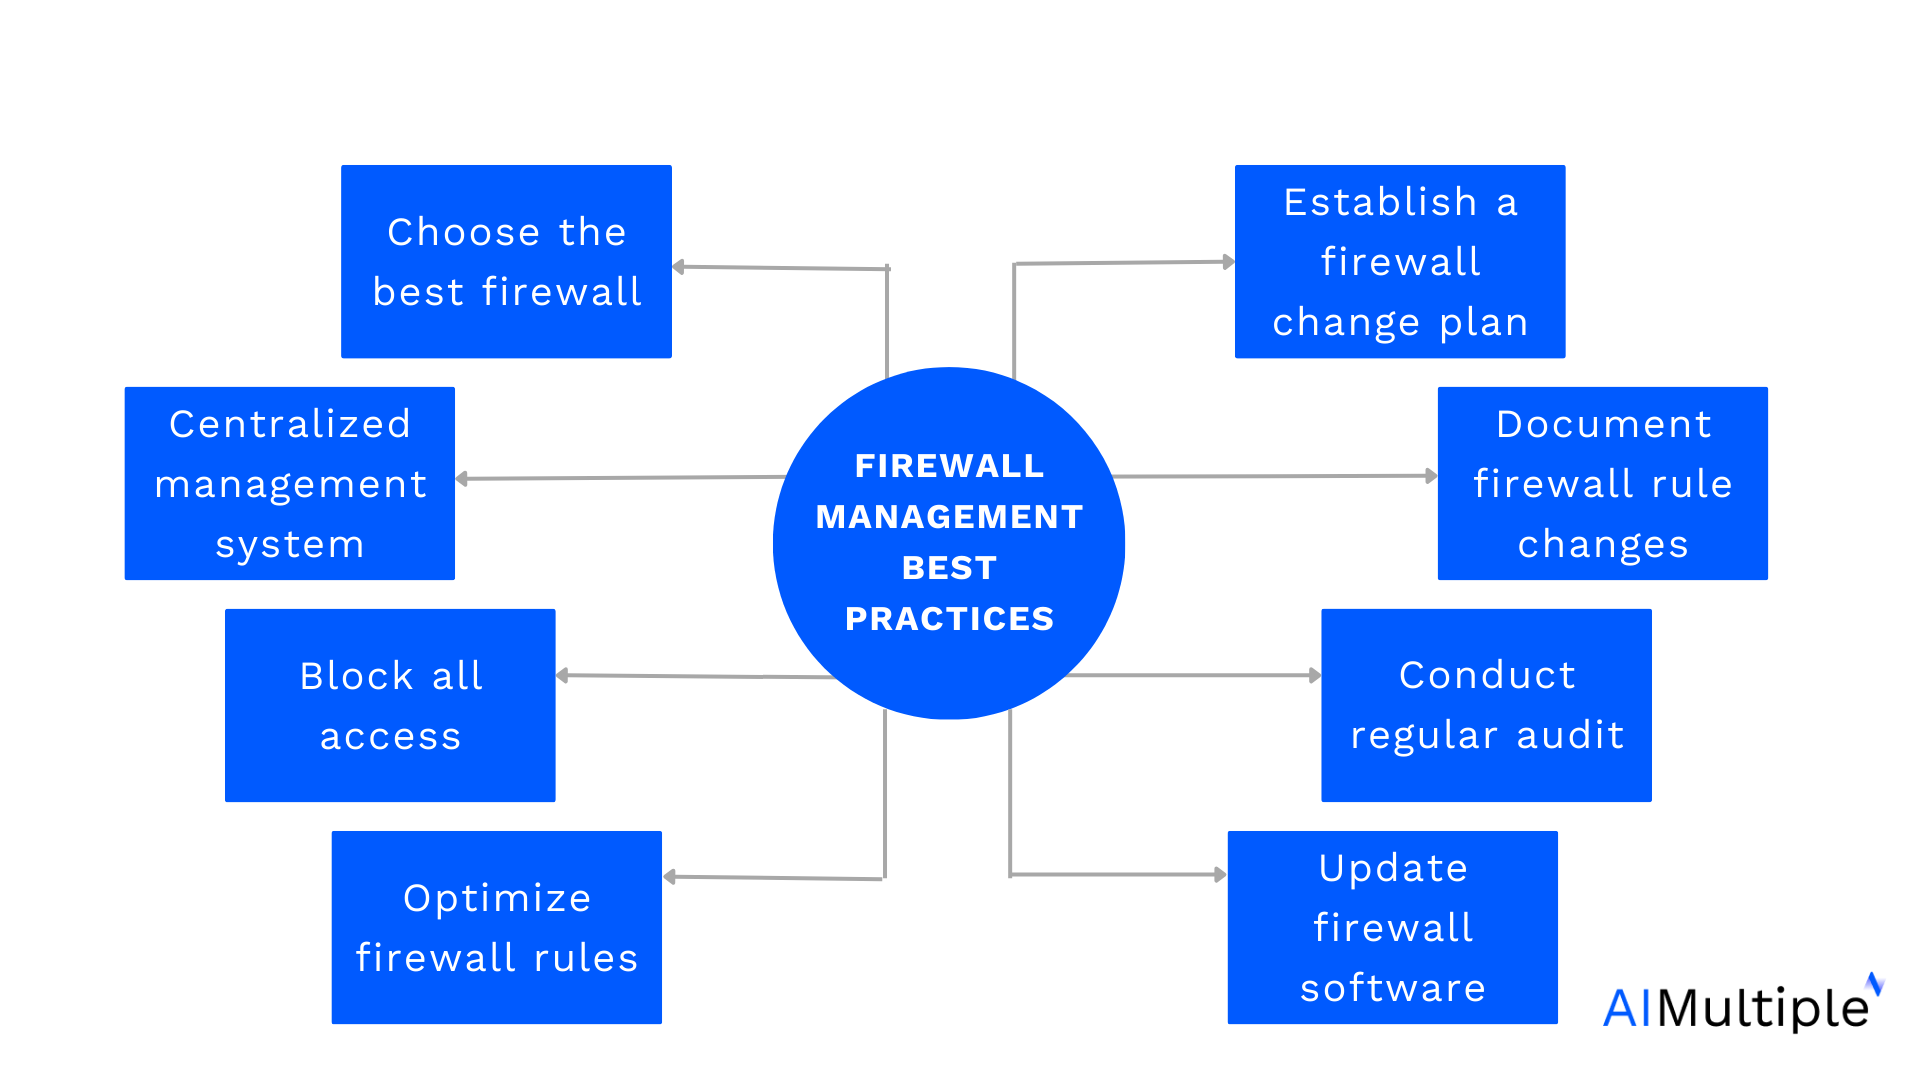 This image shows firewall management best practices.